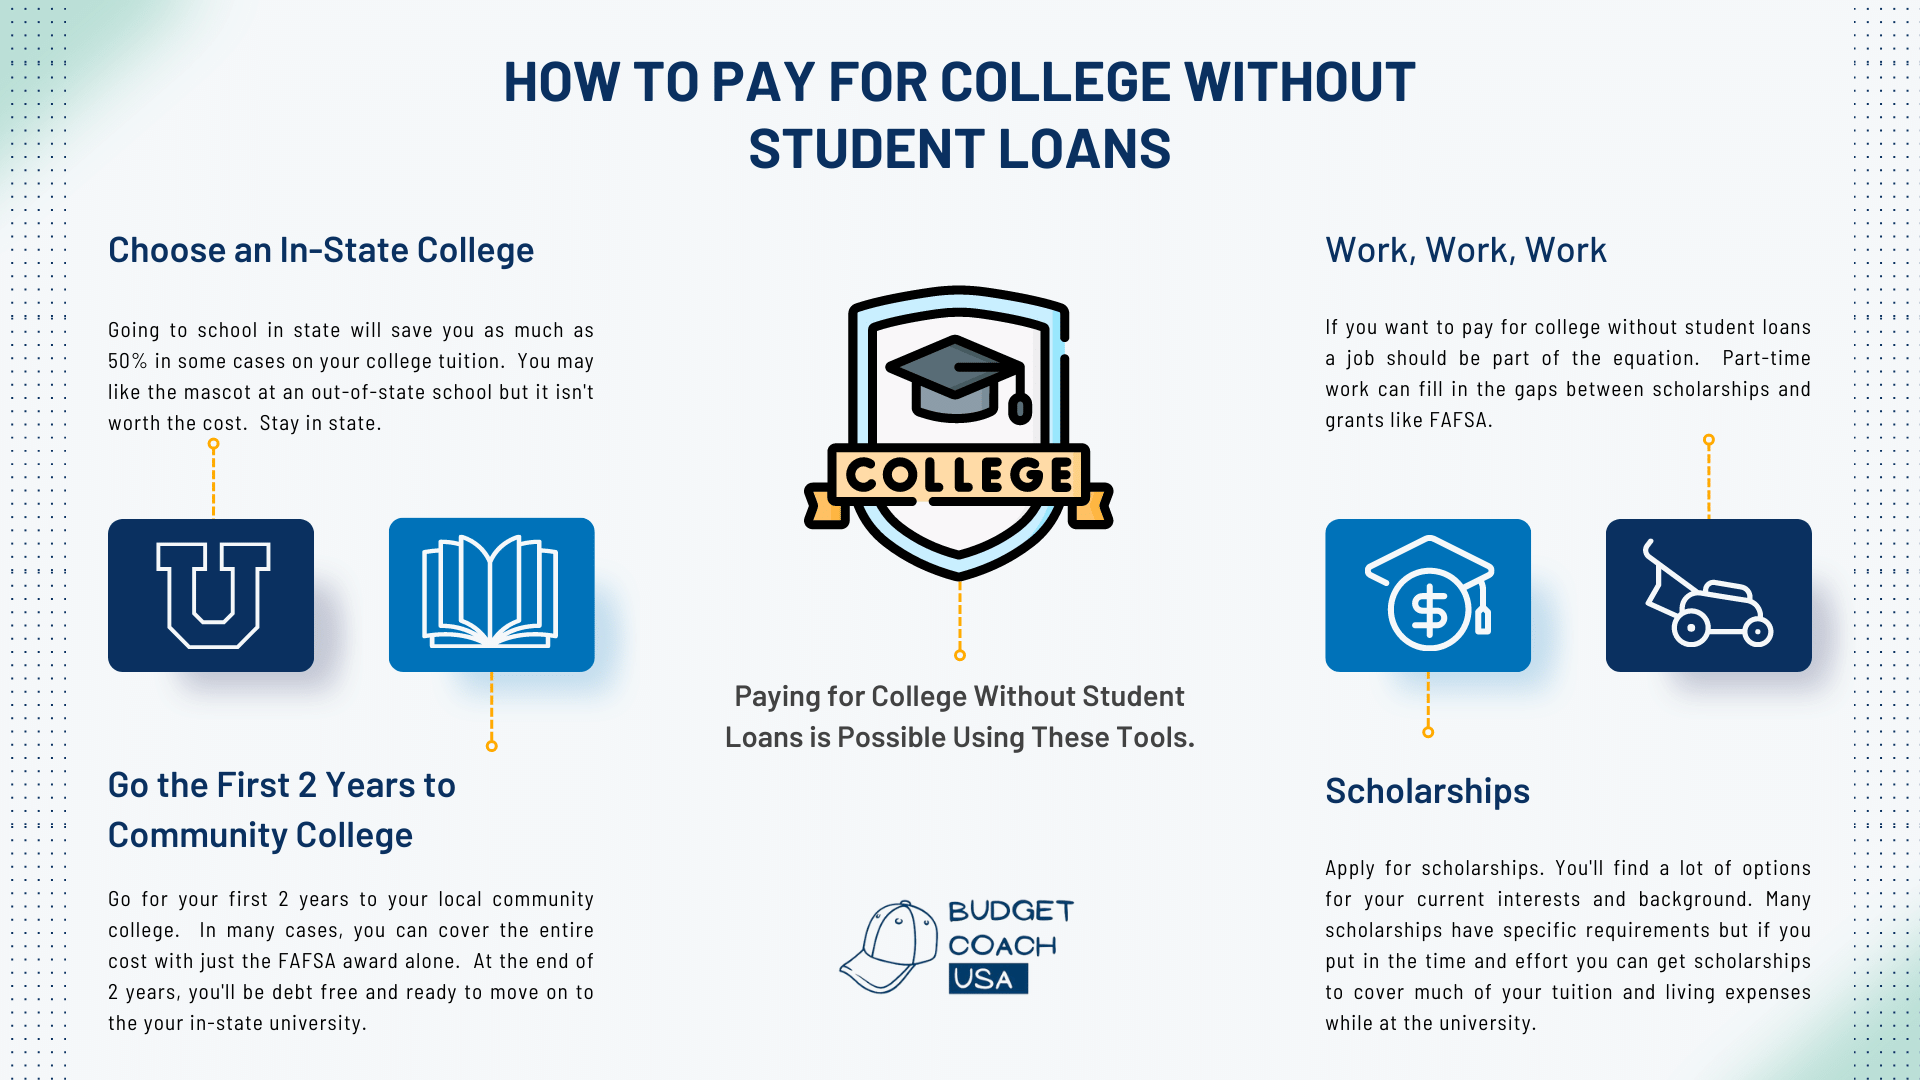 How to pay for college without student loans